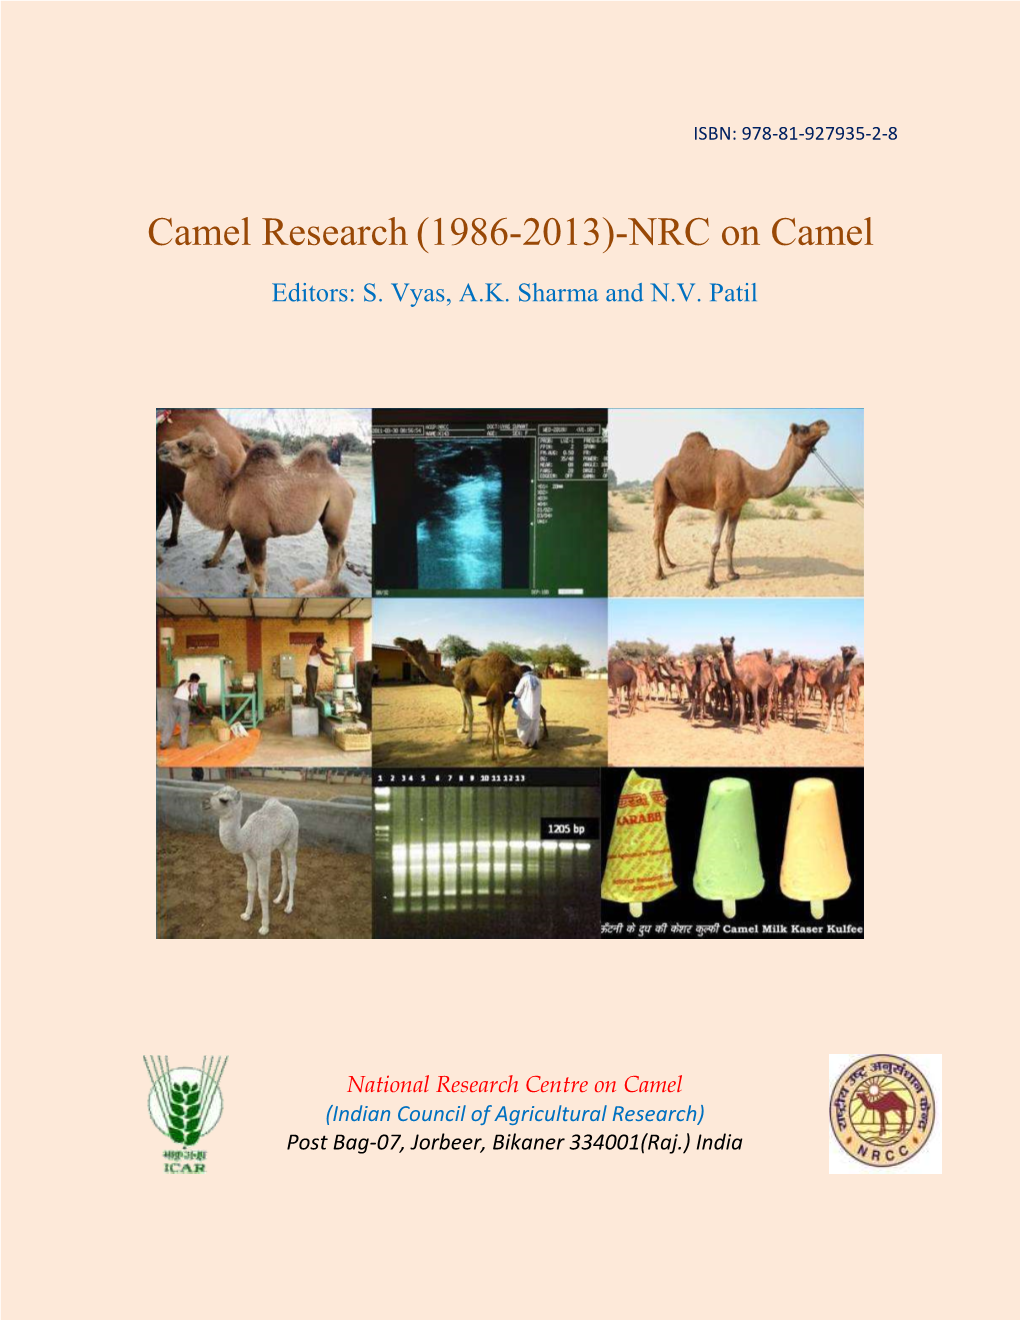 Camel Research (1986-2013)-NRC on Camel